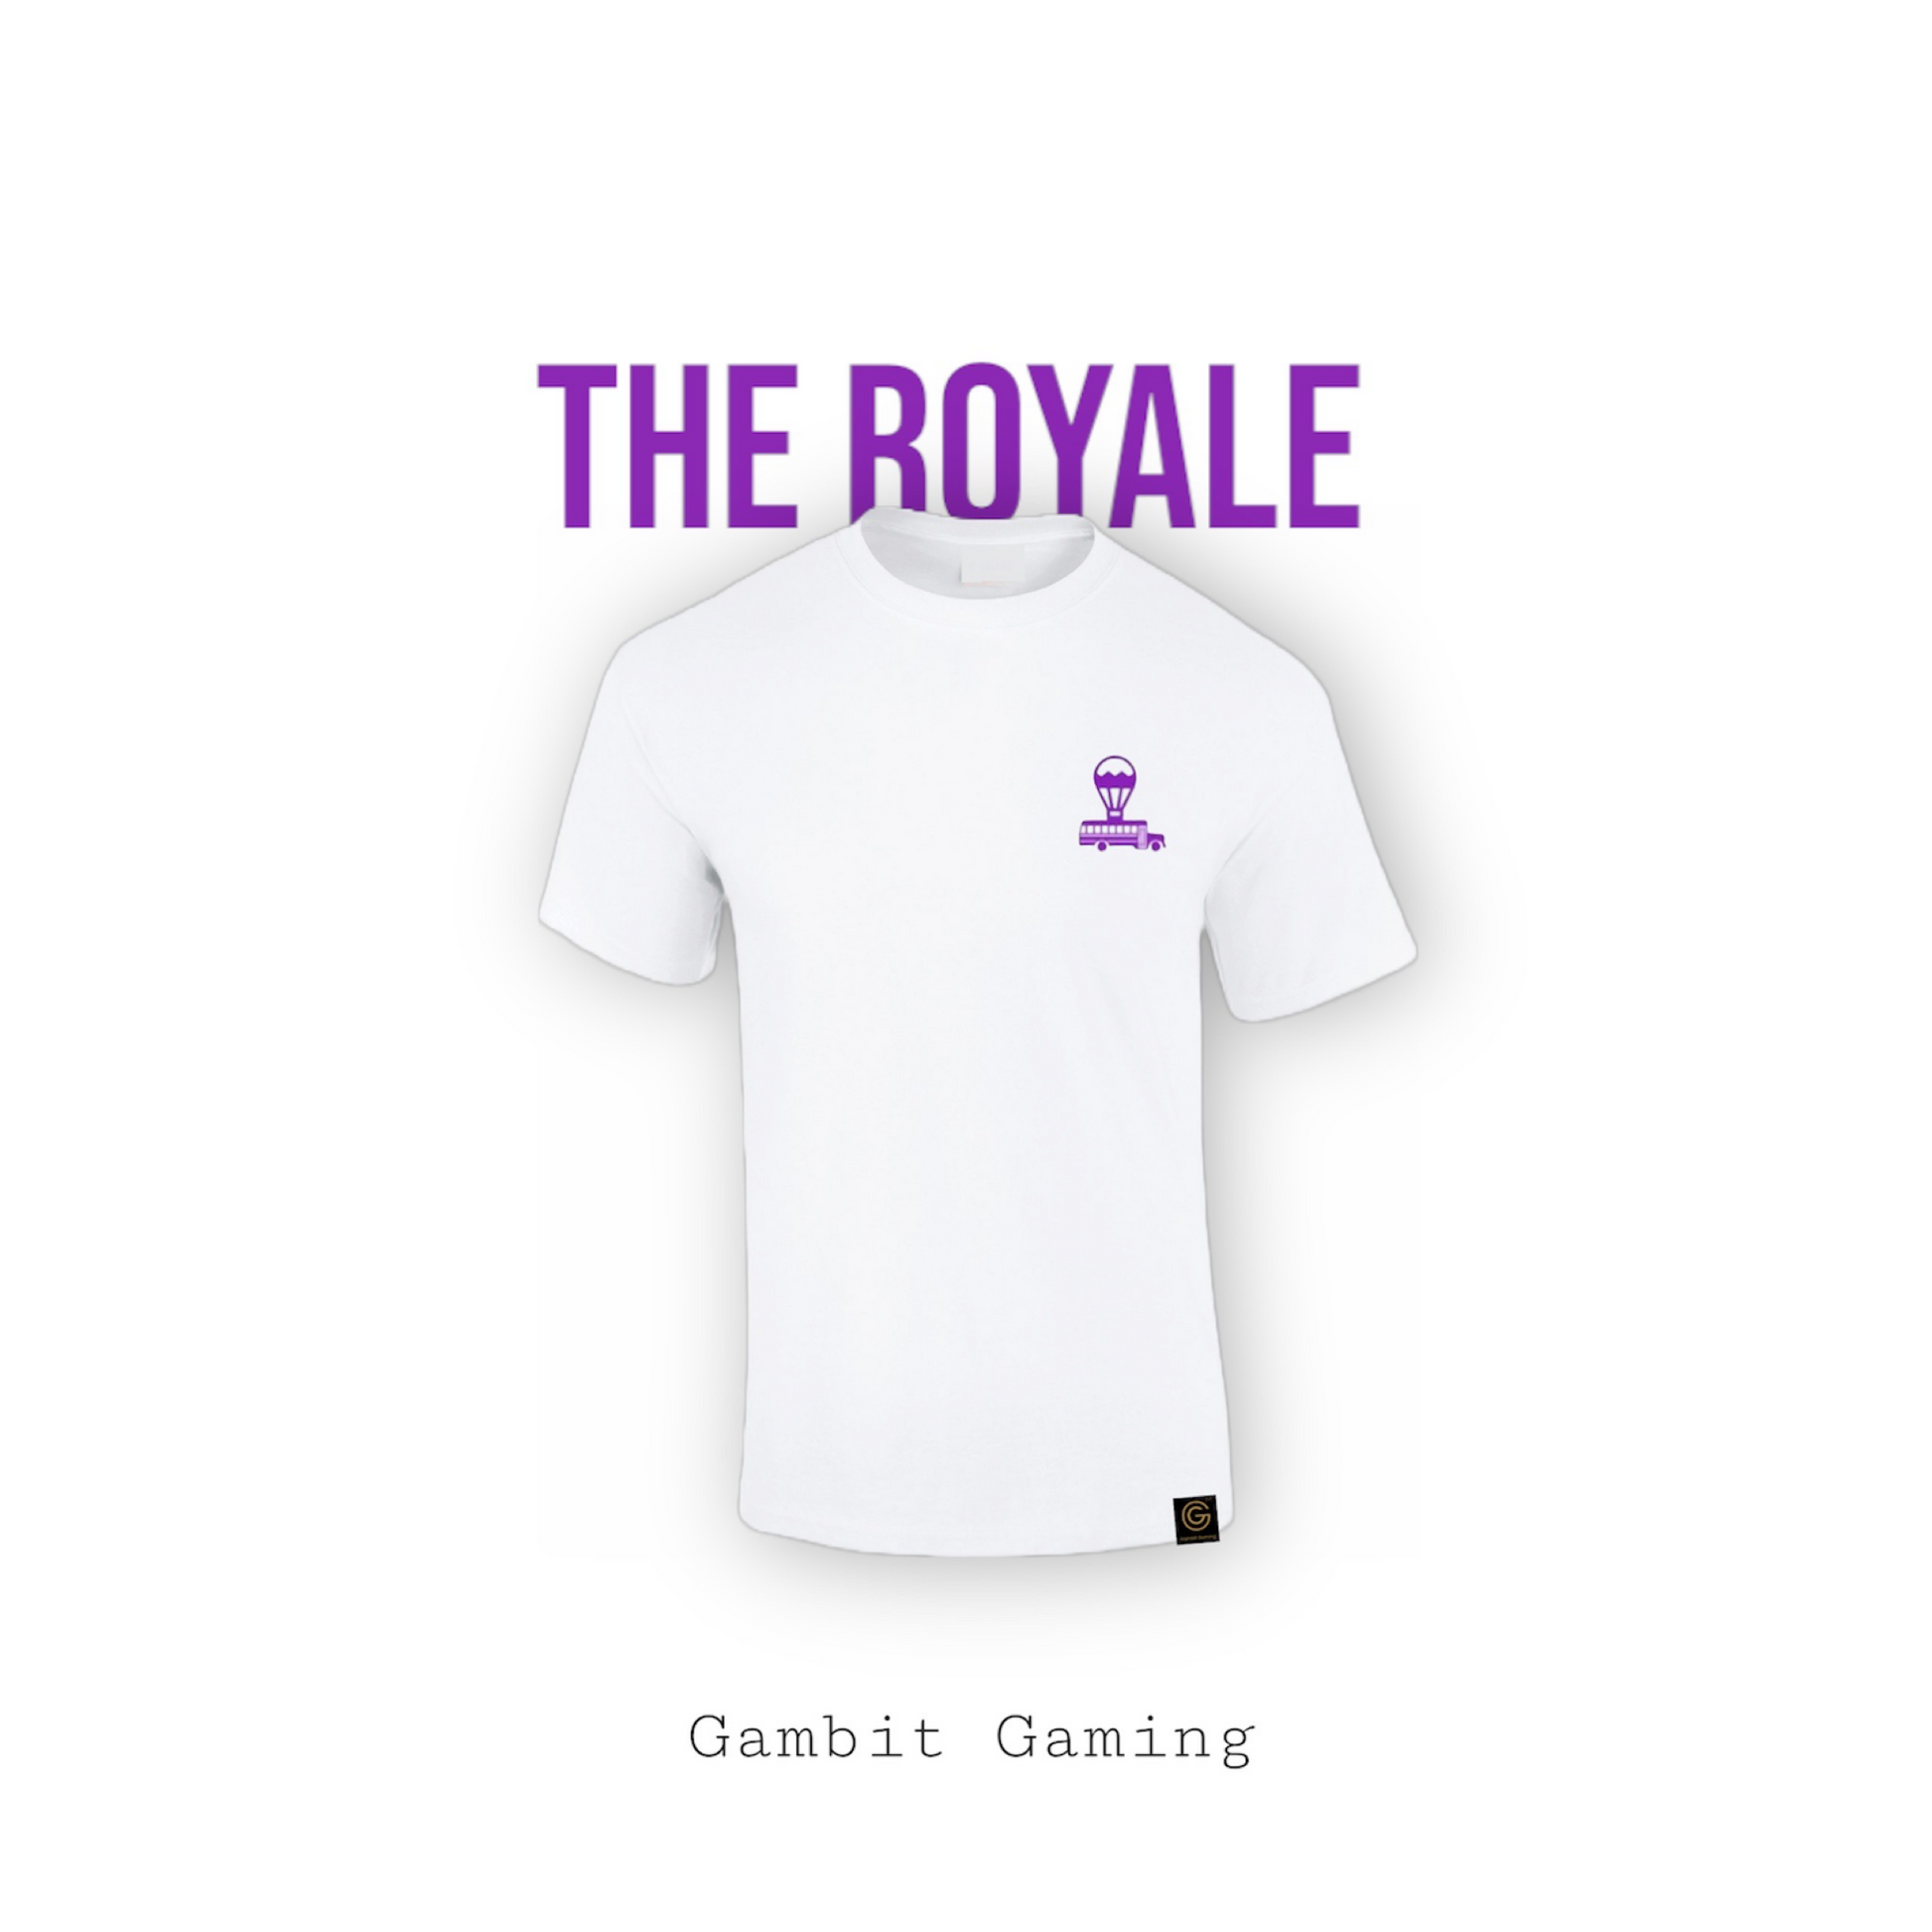 The Royale - children’s - Gambit Gaming